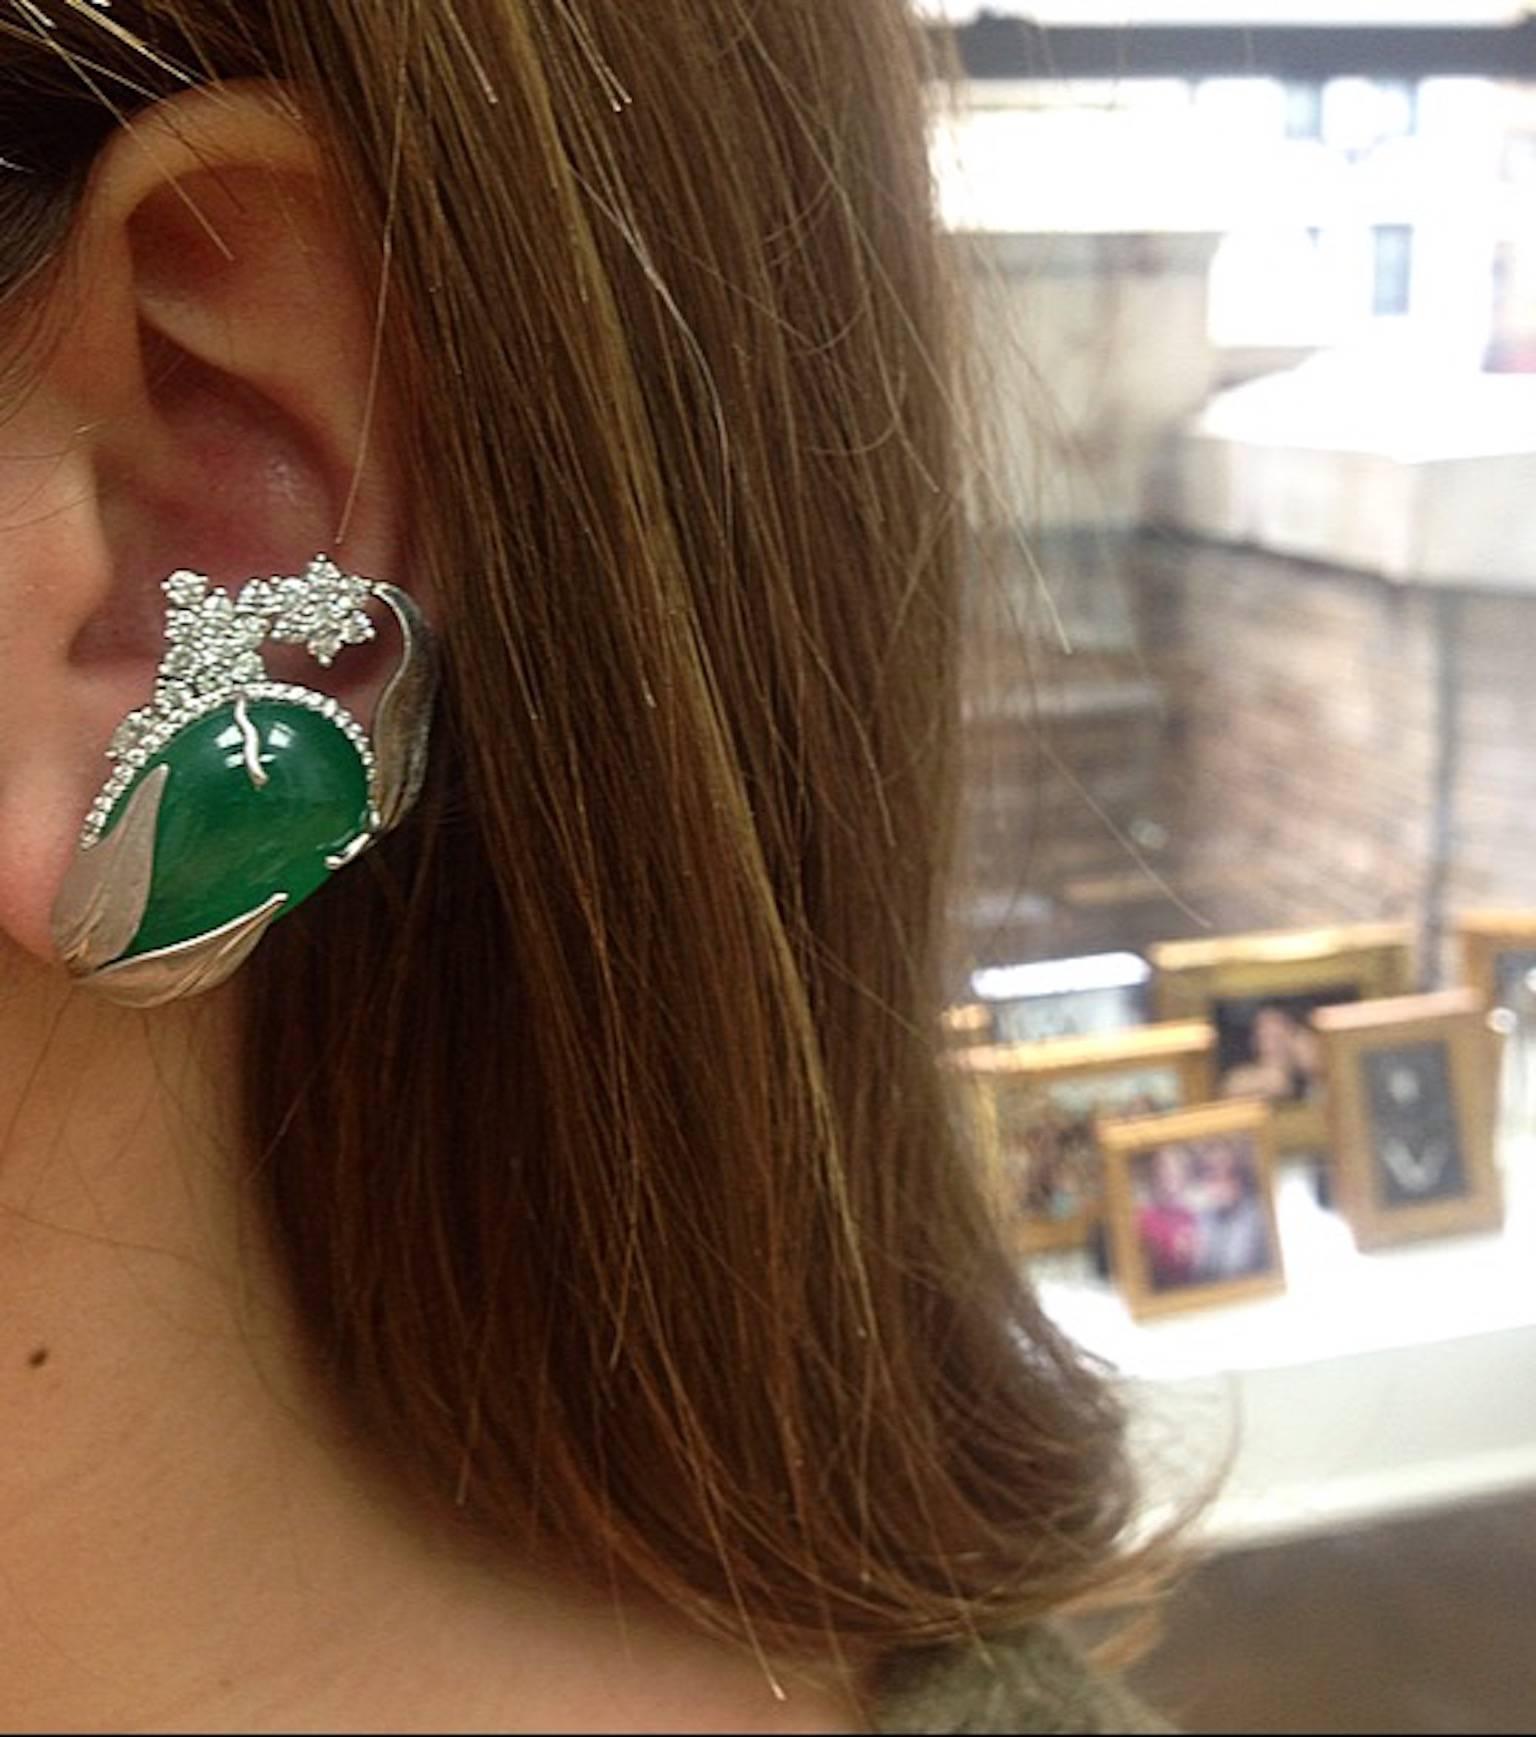 Dramatic, one-of-a-kind cuff earrings featuring matching Drop-shaped Emeralds encircled by Alexandra Mor's signature details of 1mm floating Diamond melee and knife-edged wire. Earrings are further enhanced by asymmetrical platinum leaves and